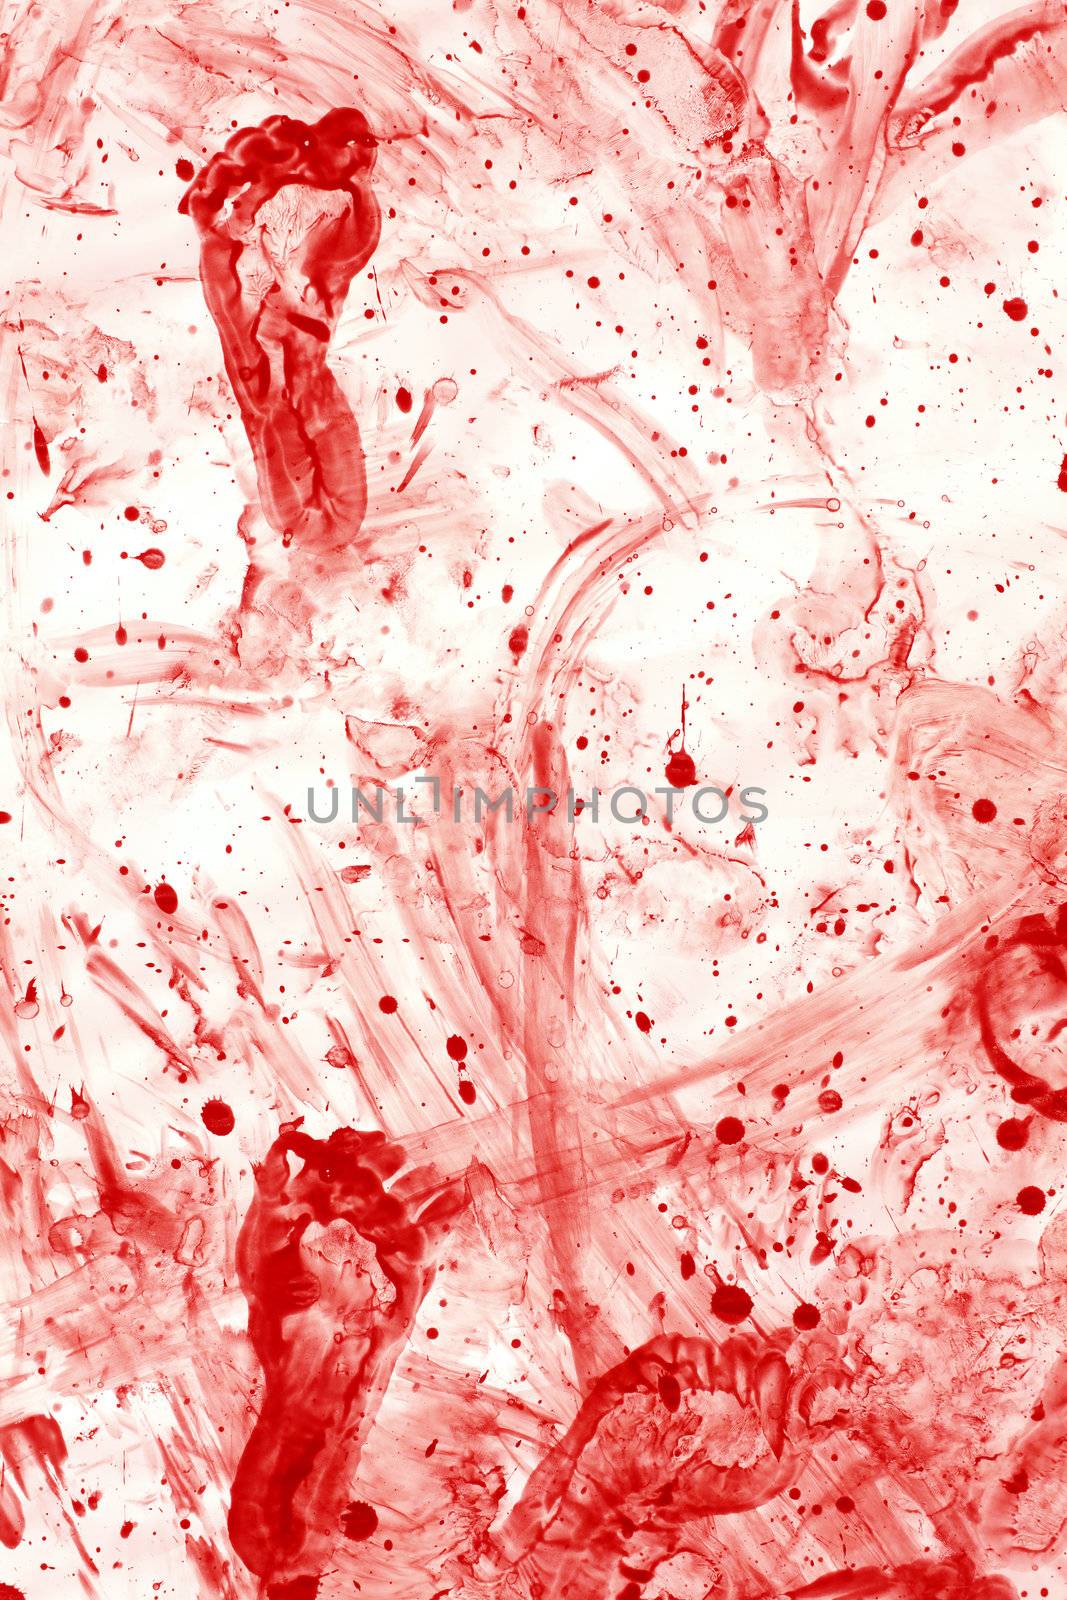 Photo of a mess of blood splatters, droplets, footprints and smears.
